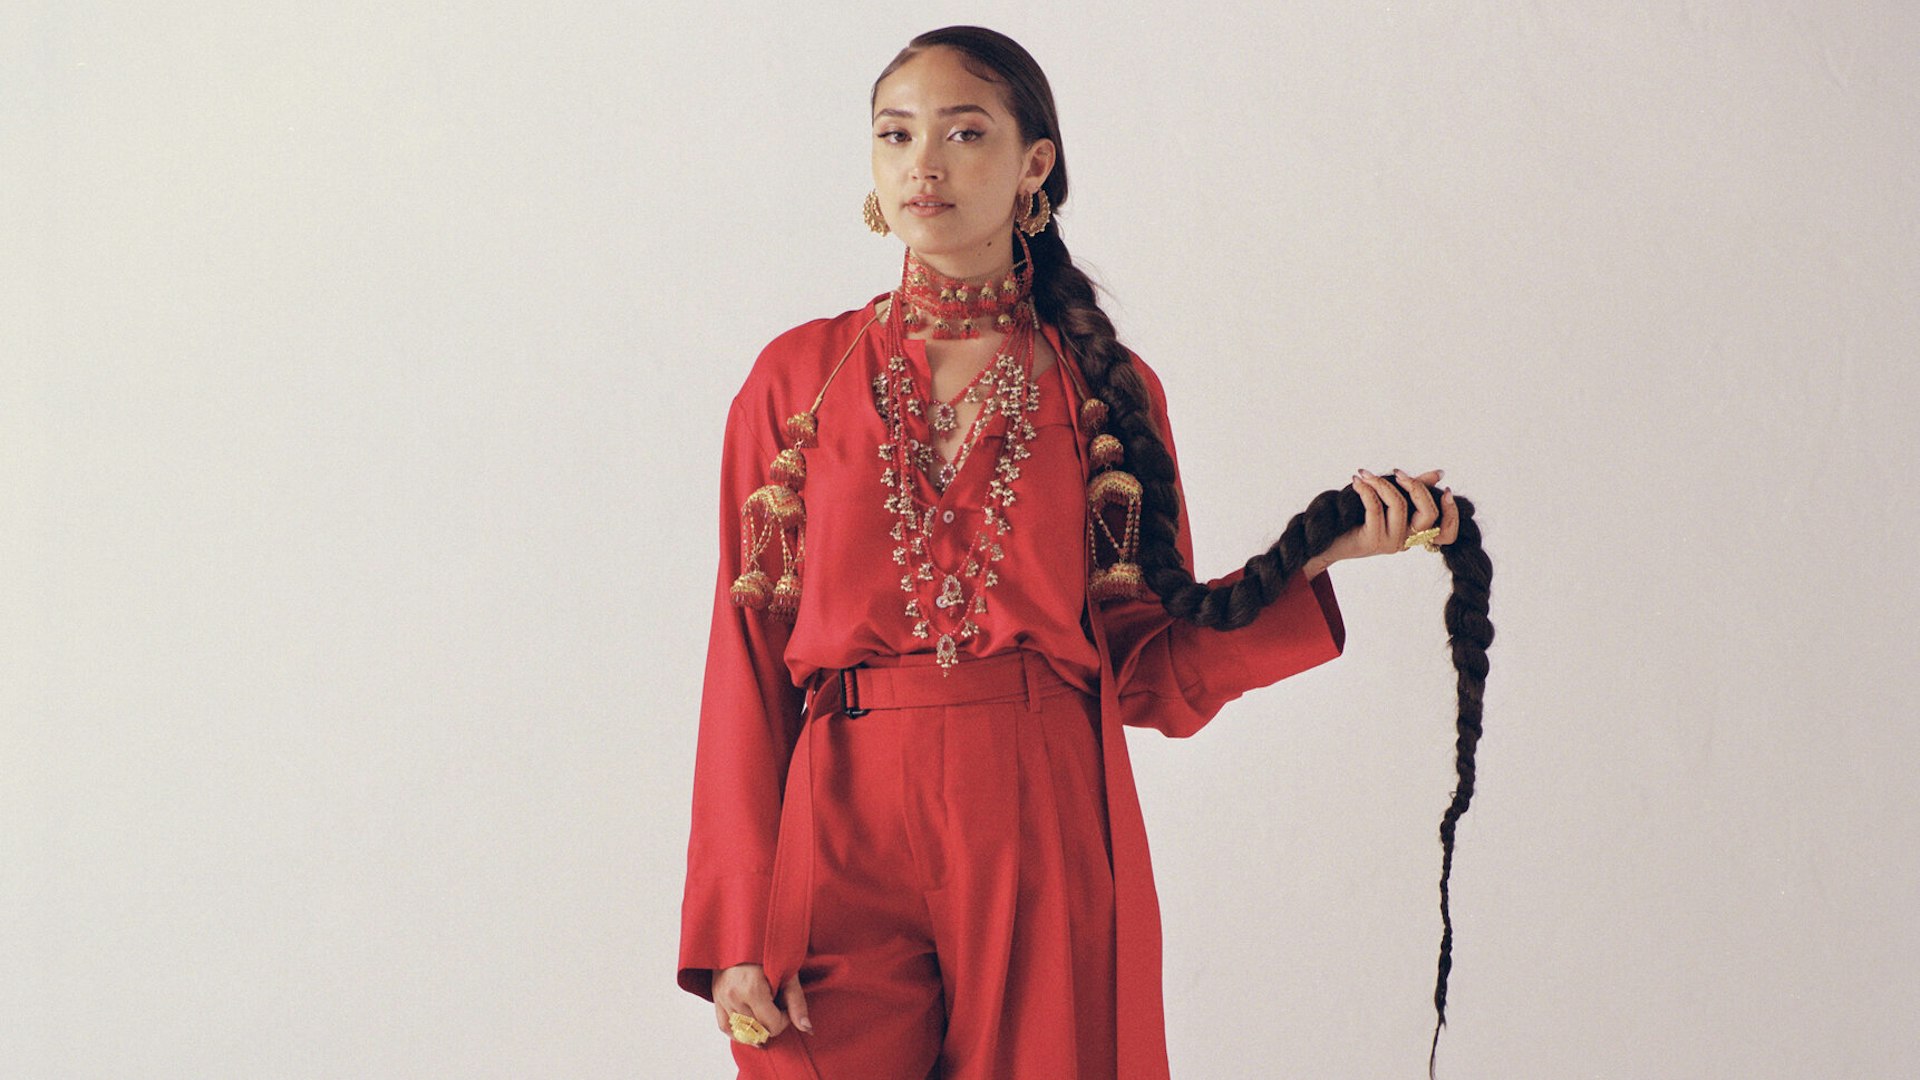 Joy Crookes is challenging perceptions of identity